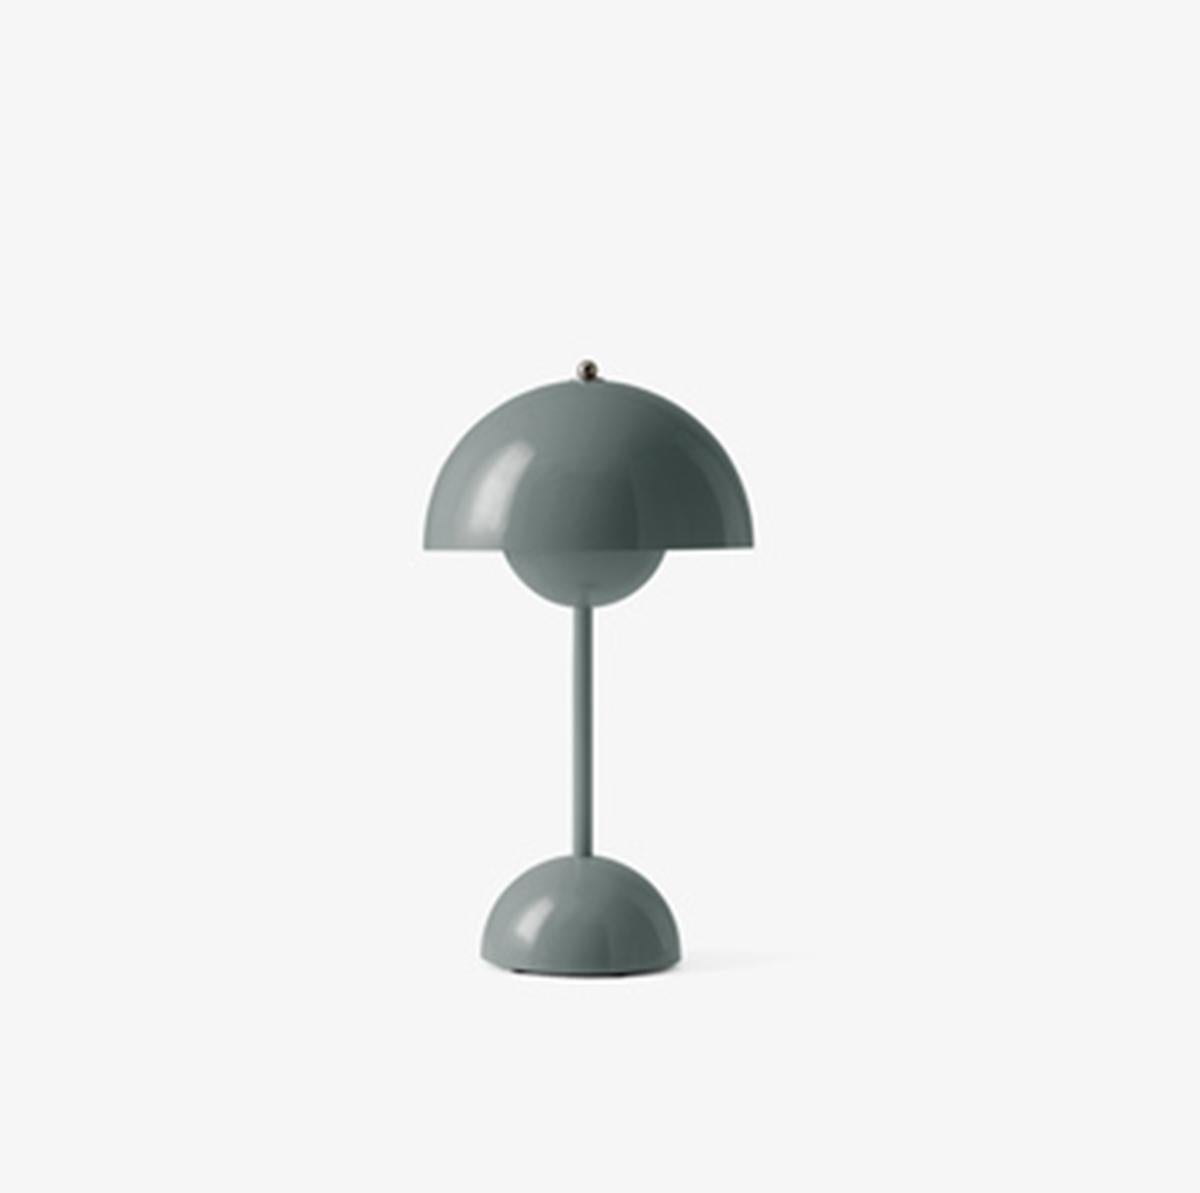 The Flowerpot table lamp with a rounded pendant that hangs from the semi-domed upper shade, design of Verner Panton 1968. 
Slightly smaller in size than the table lamp version, and deliberately lightweight, the portable VP9 comes equipped with a